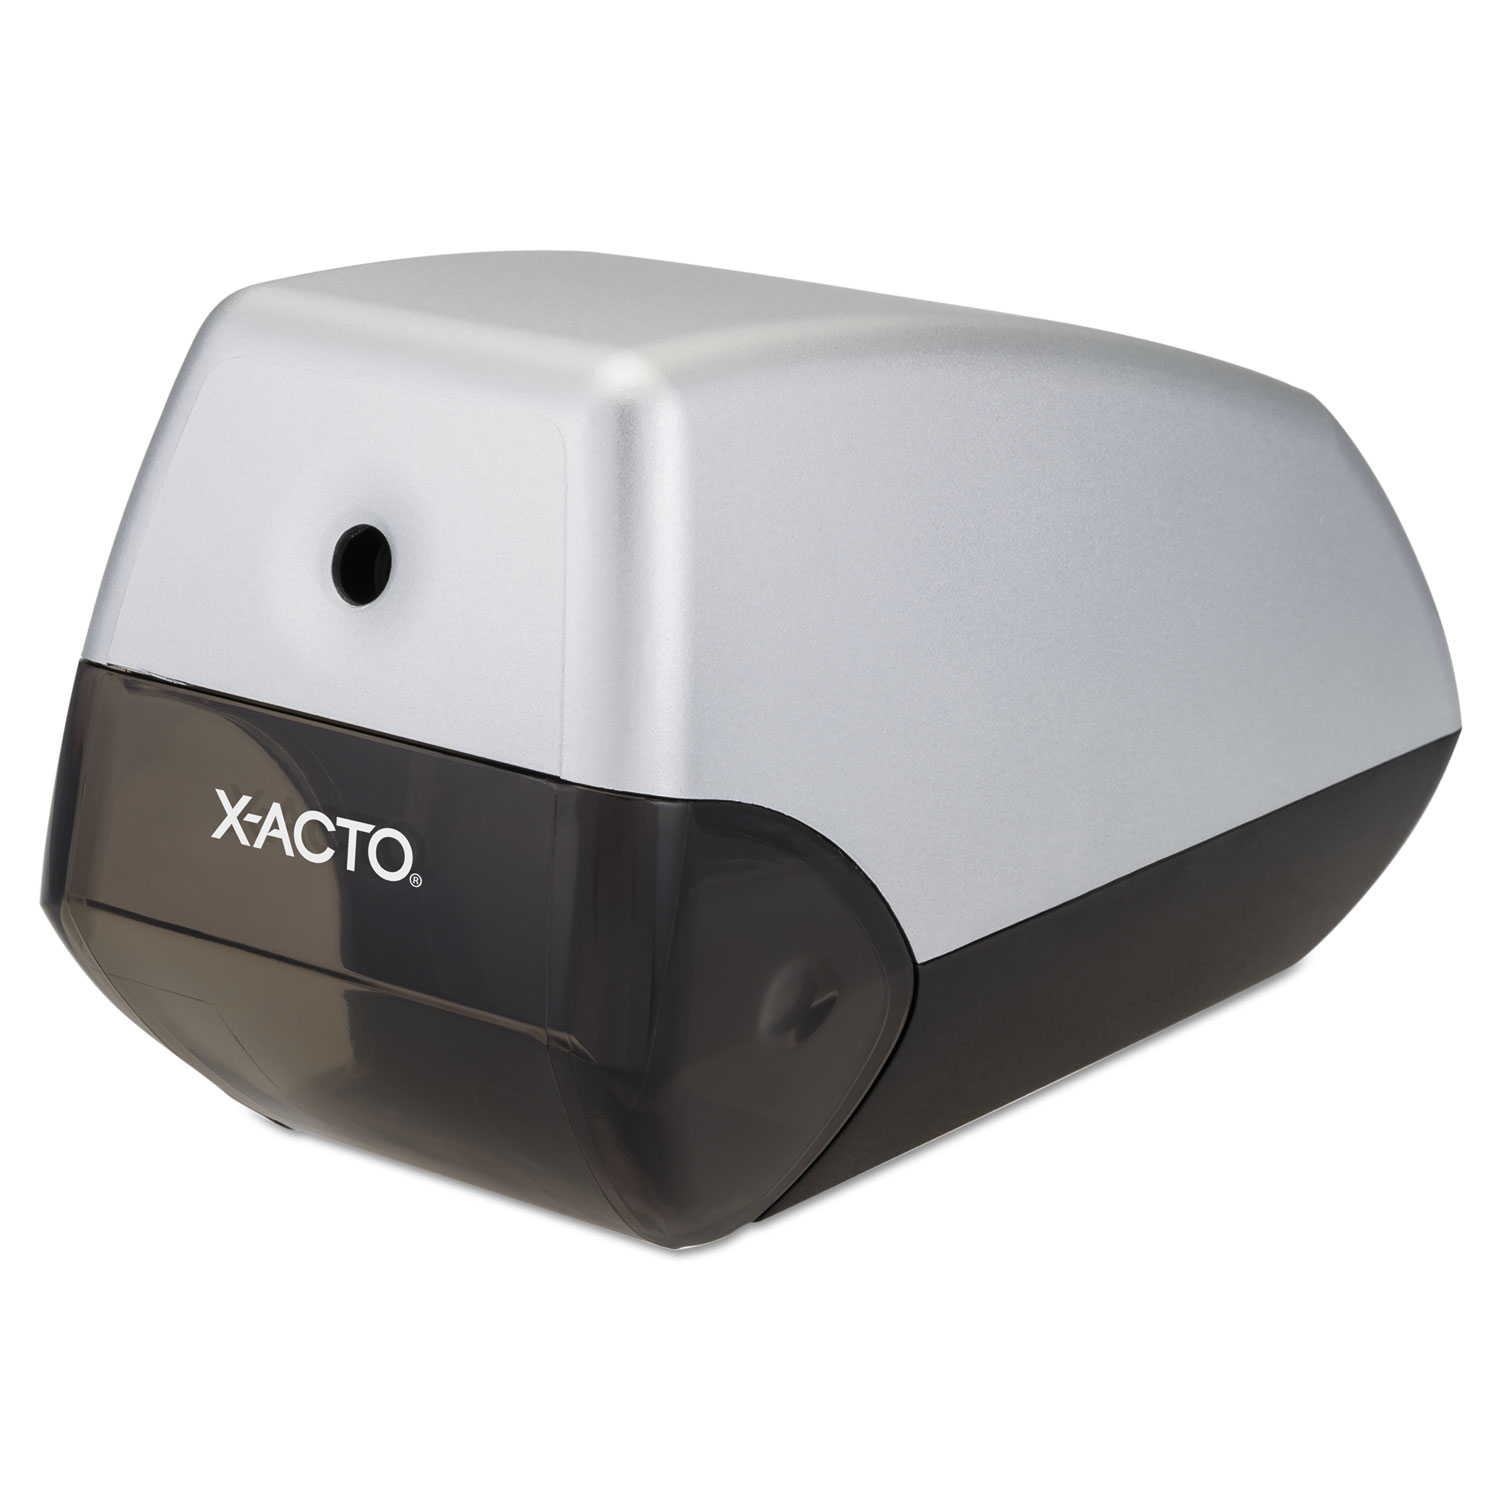  X-ACTO 1900LMR Helix Office Electric Pencil Sharpener, AC-Powered, 3 x 6.5 x 4.5, Silver/Black (EPI1900LMR) 